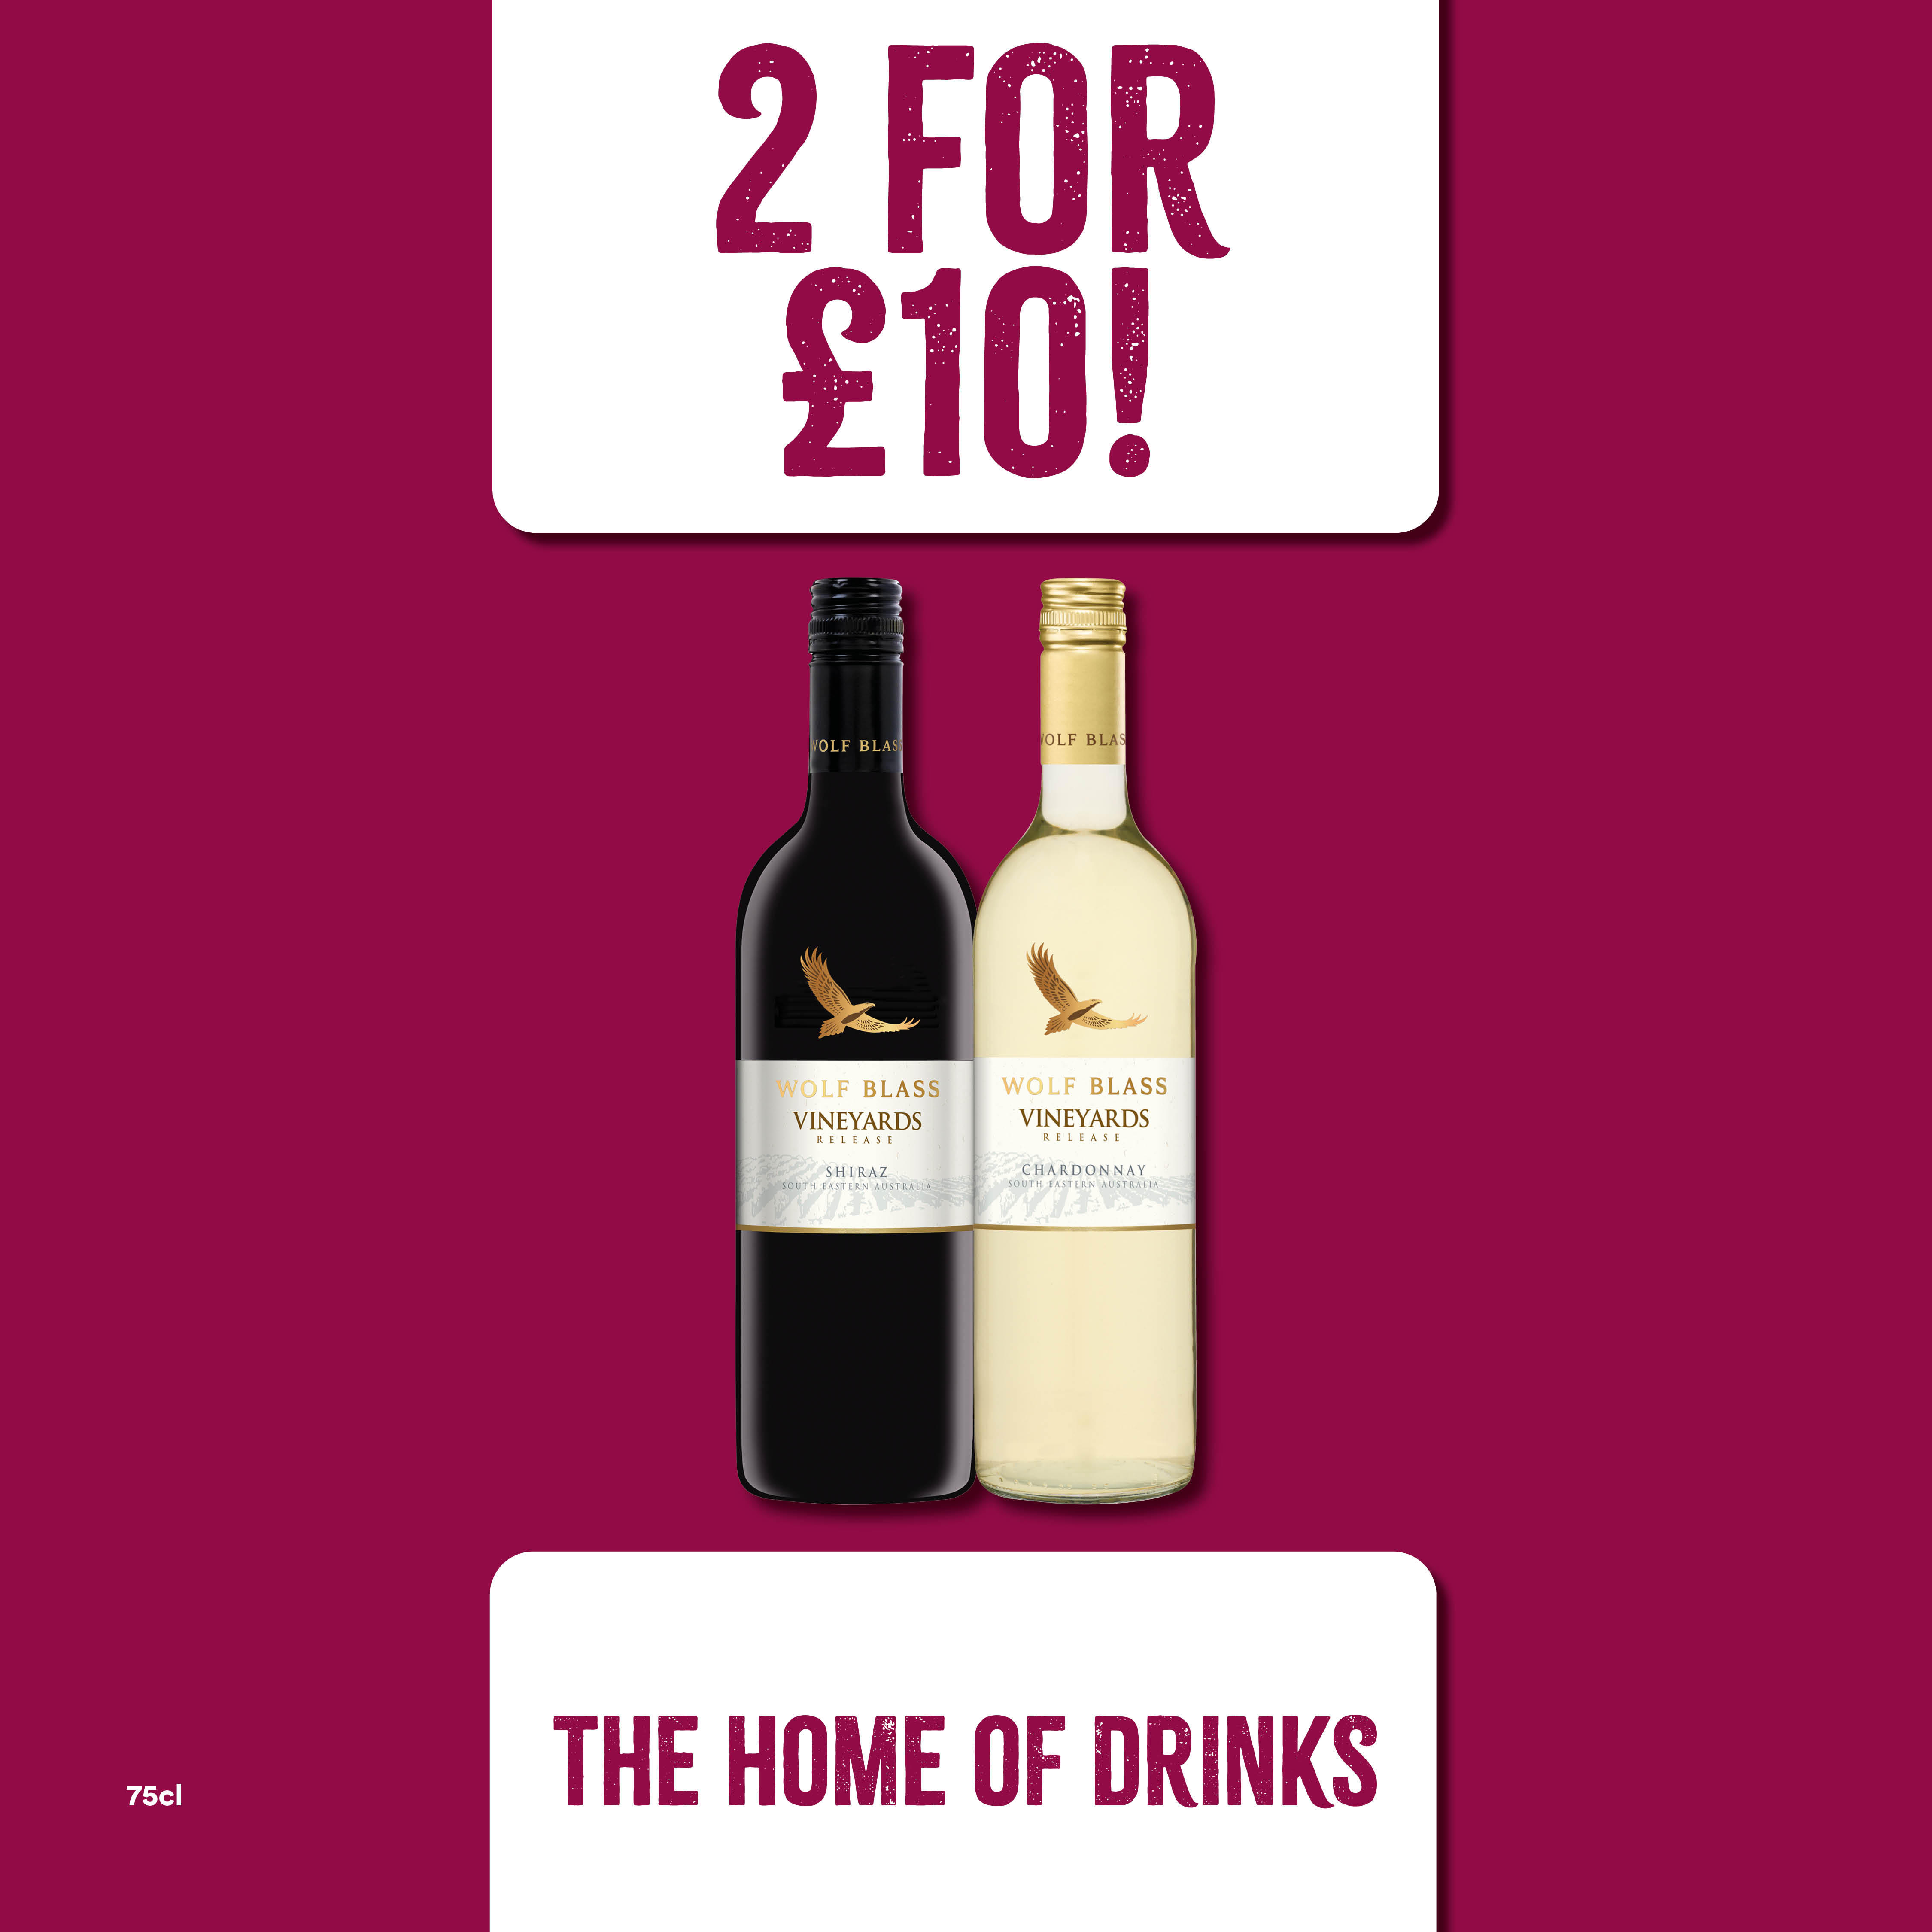 2 for £10 Wolfblass vineyards Bargain Booze Newport Pagnell 01908 612653